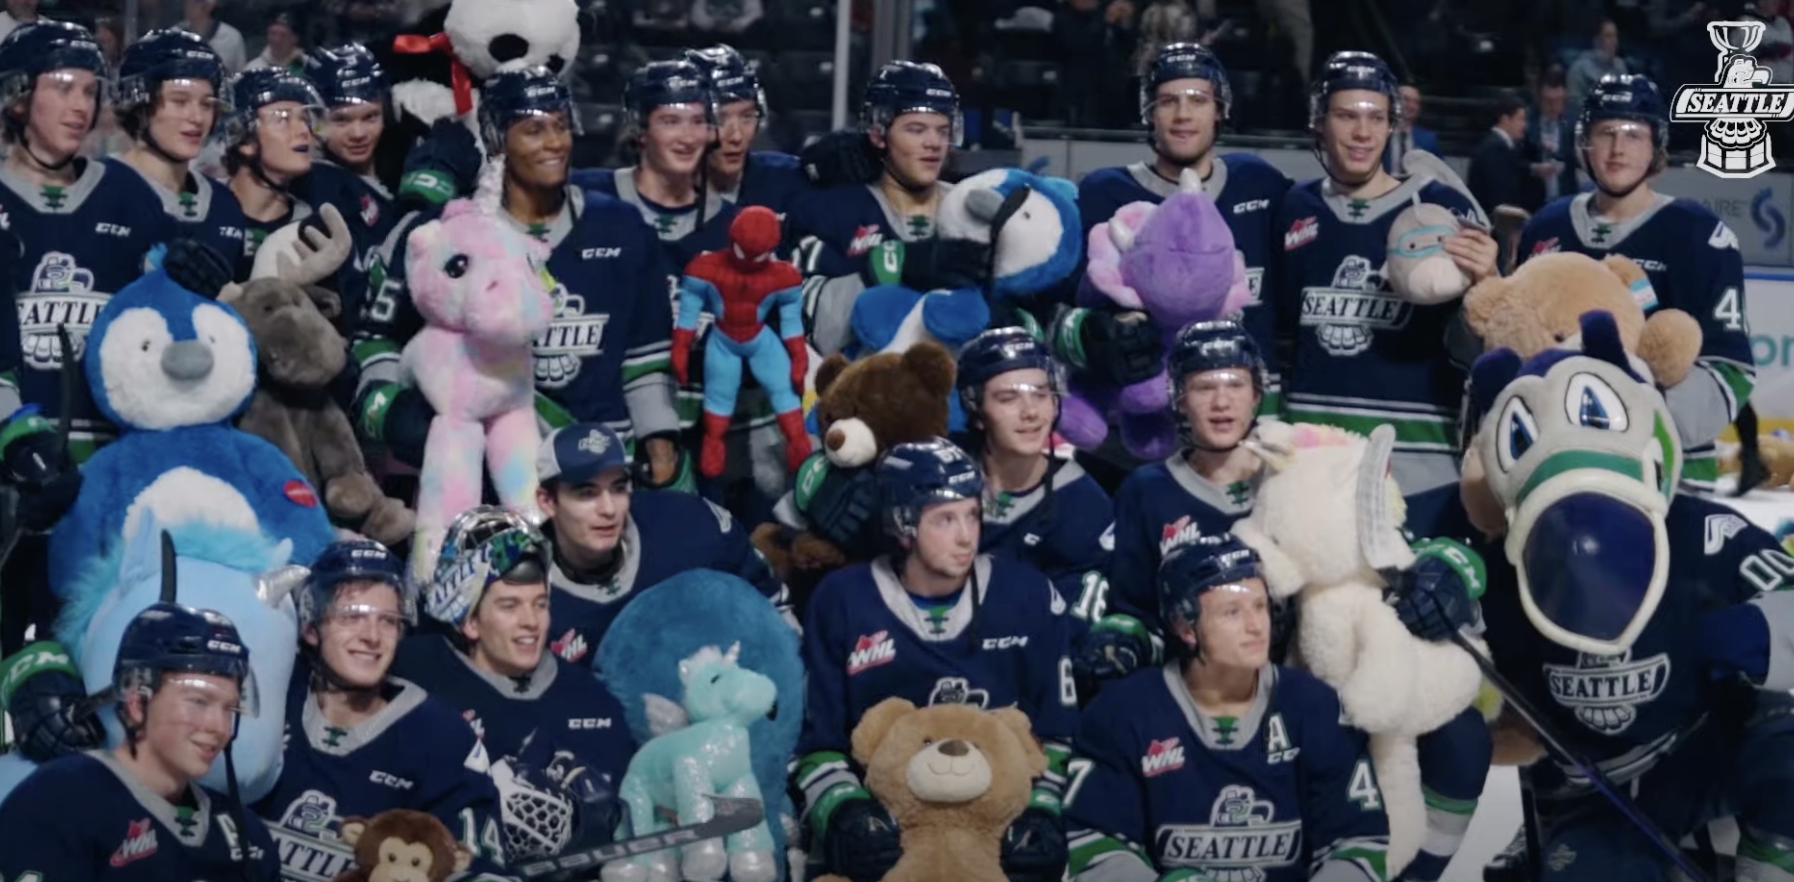 A screenshot of the Seattle Thunderbirds posing with teddy bears after winning